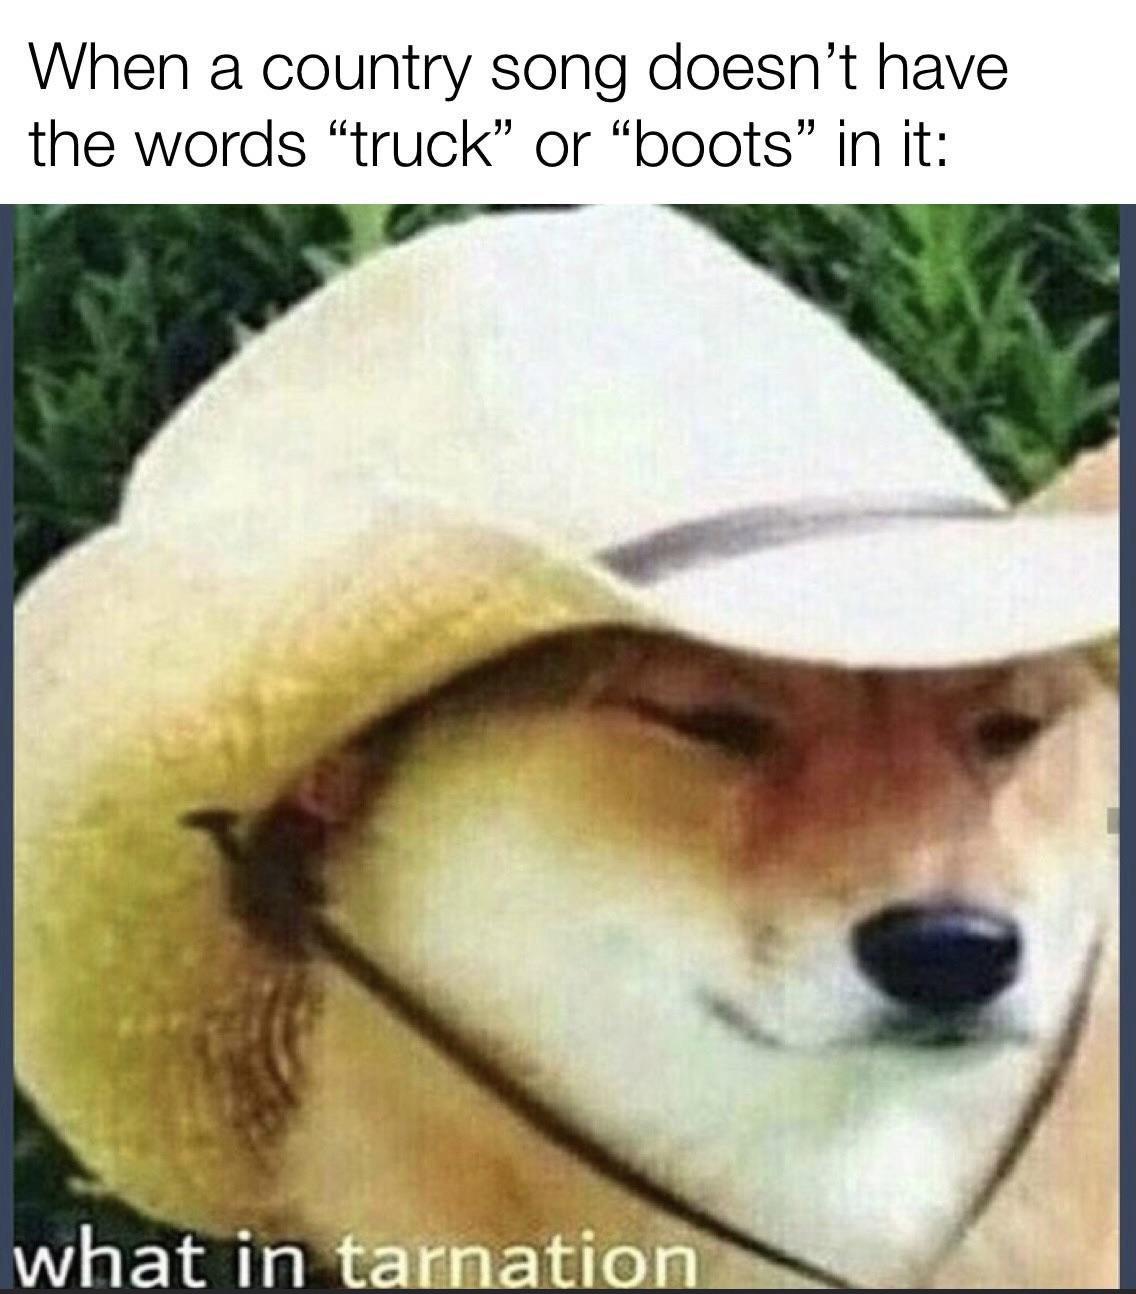 dank memes - f250 what in tarnation meme - When a country song doesn't have the words "truck" or "boots" in it what in tarnation